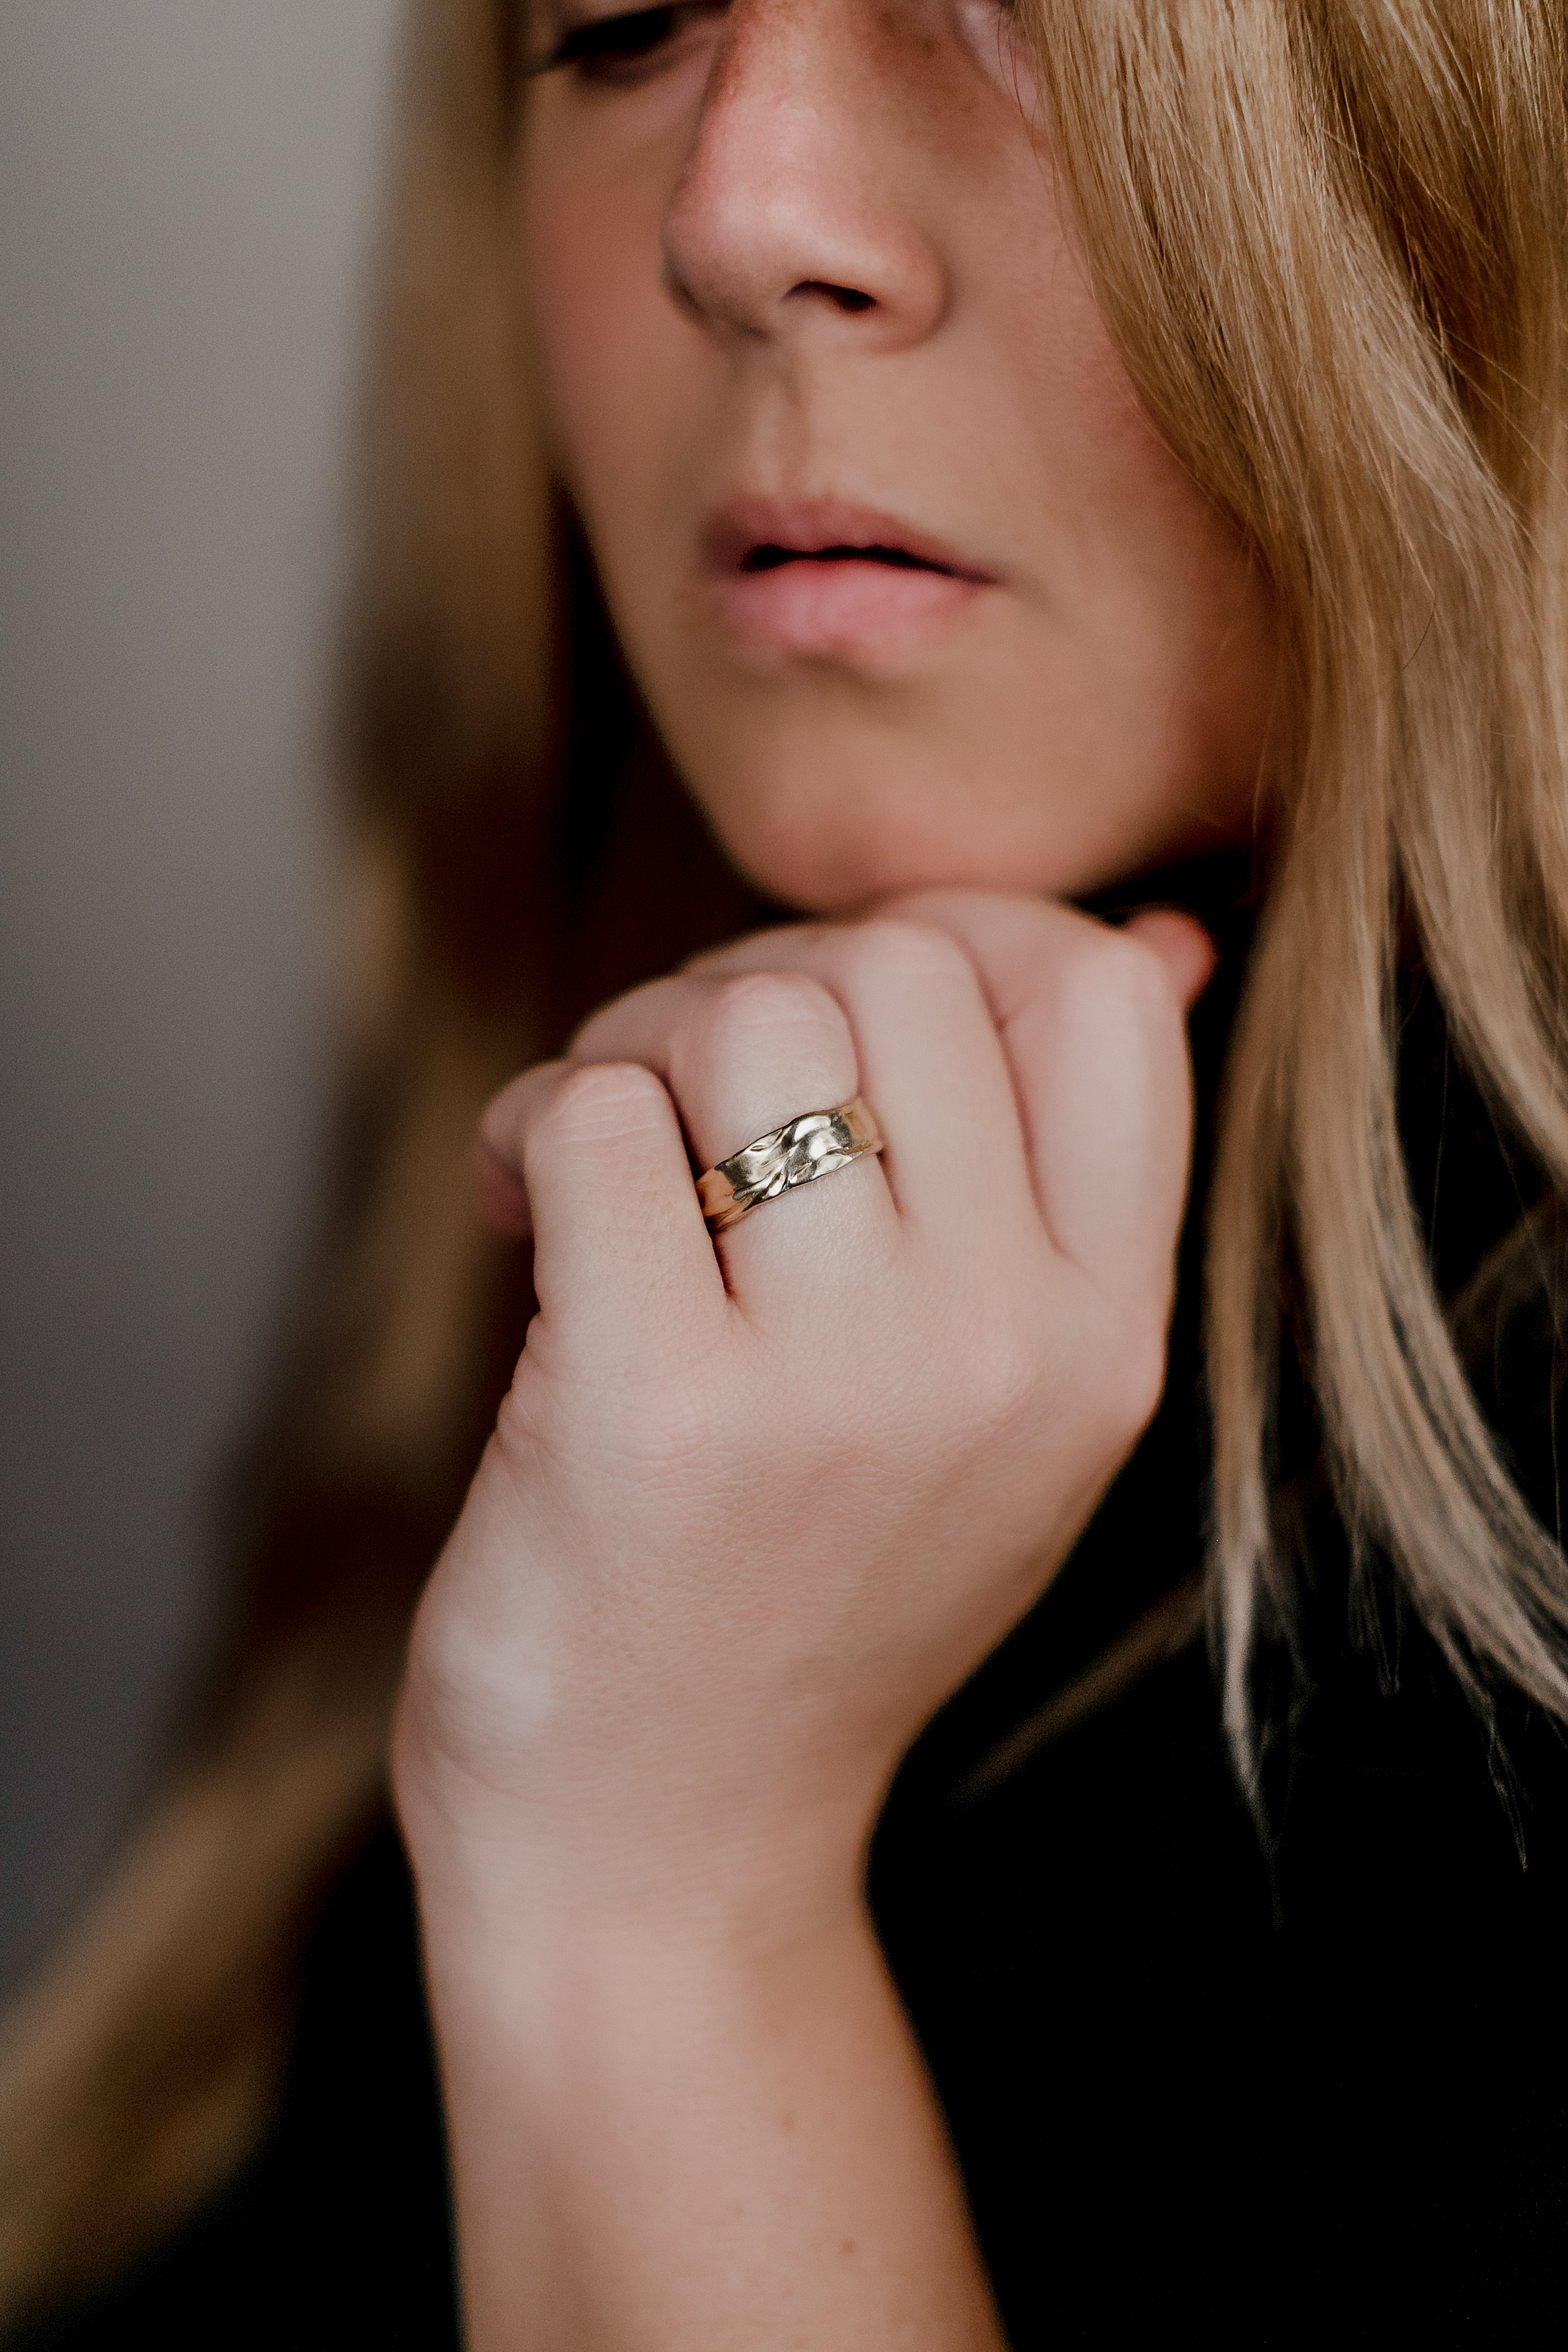 The striking Drift Band is a beautifully textured modern ring in 14k yellow gold creating a lightweight and organic band.